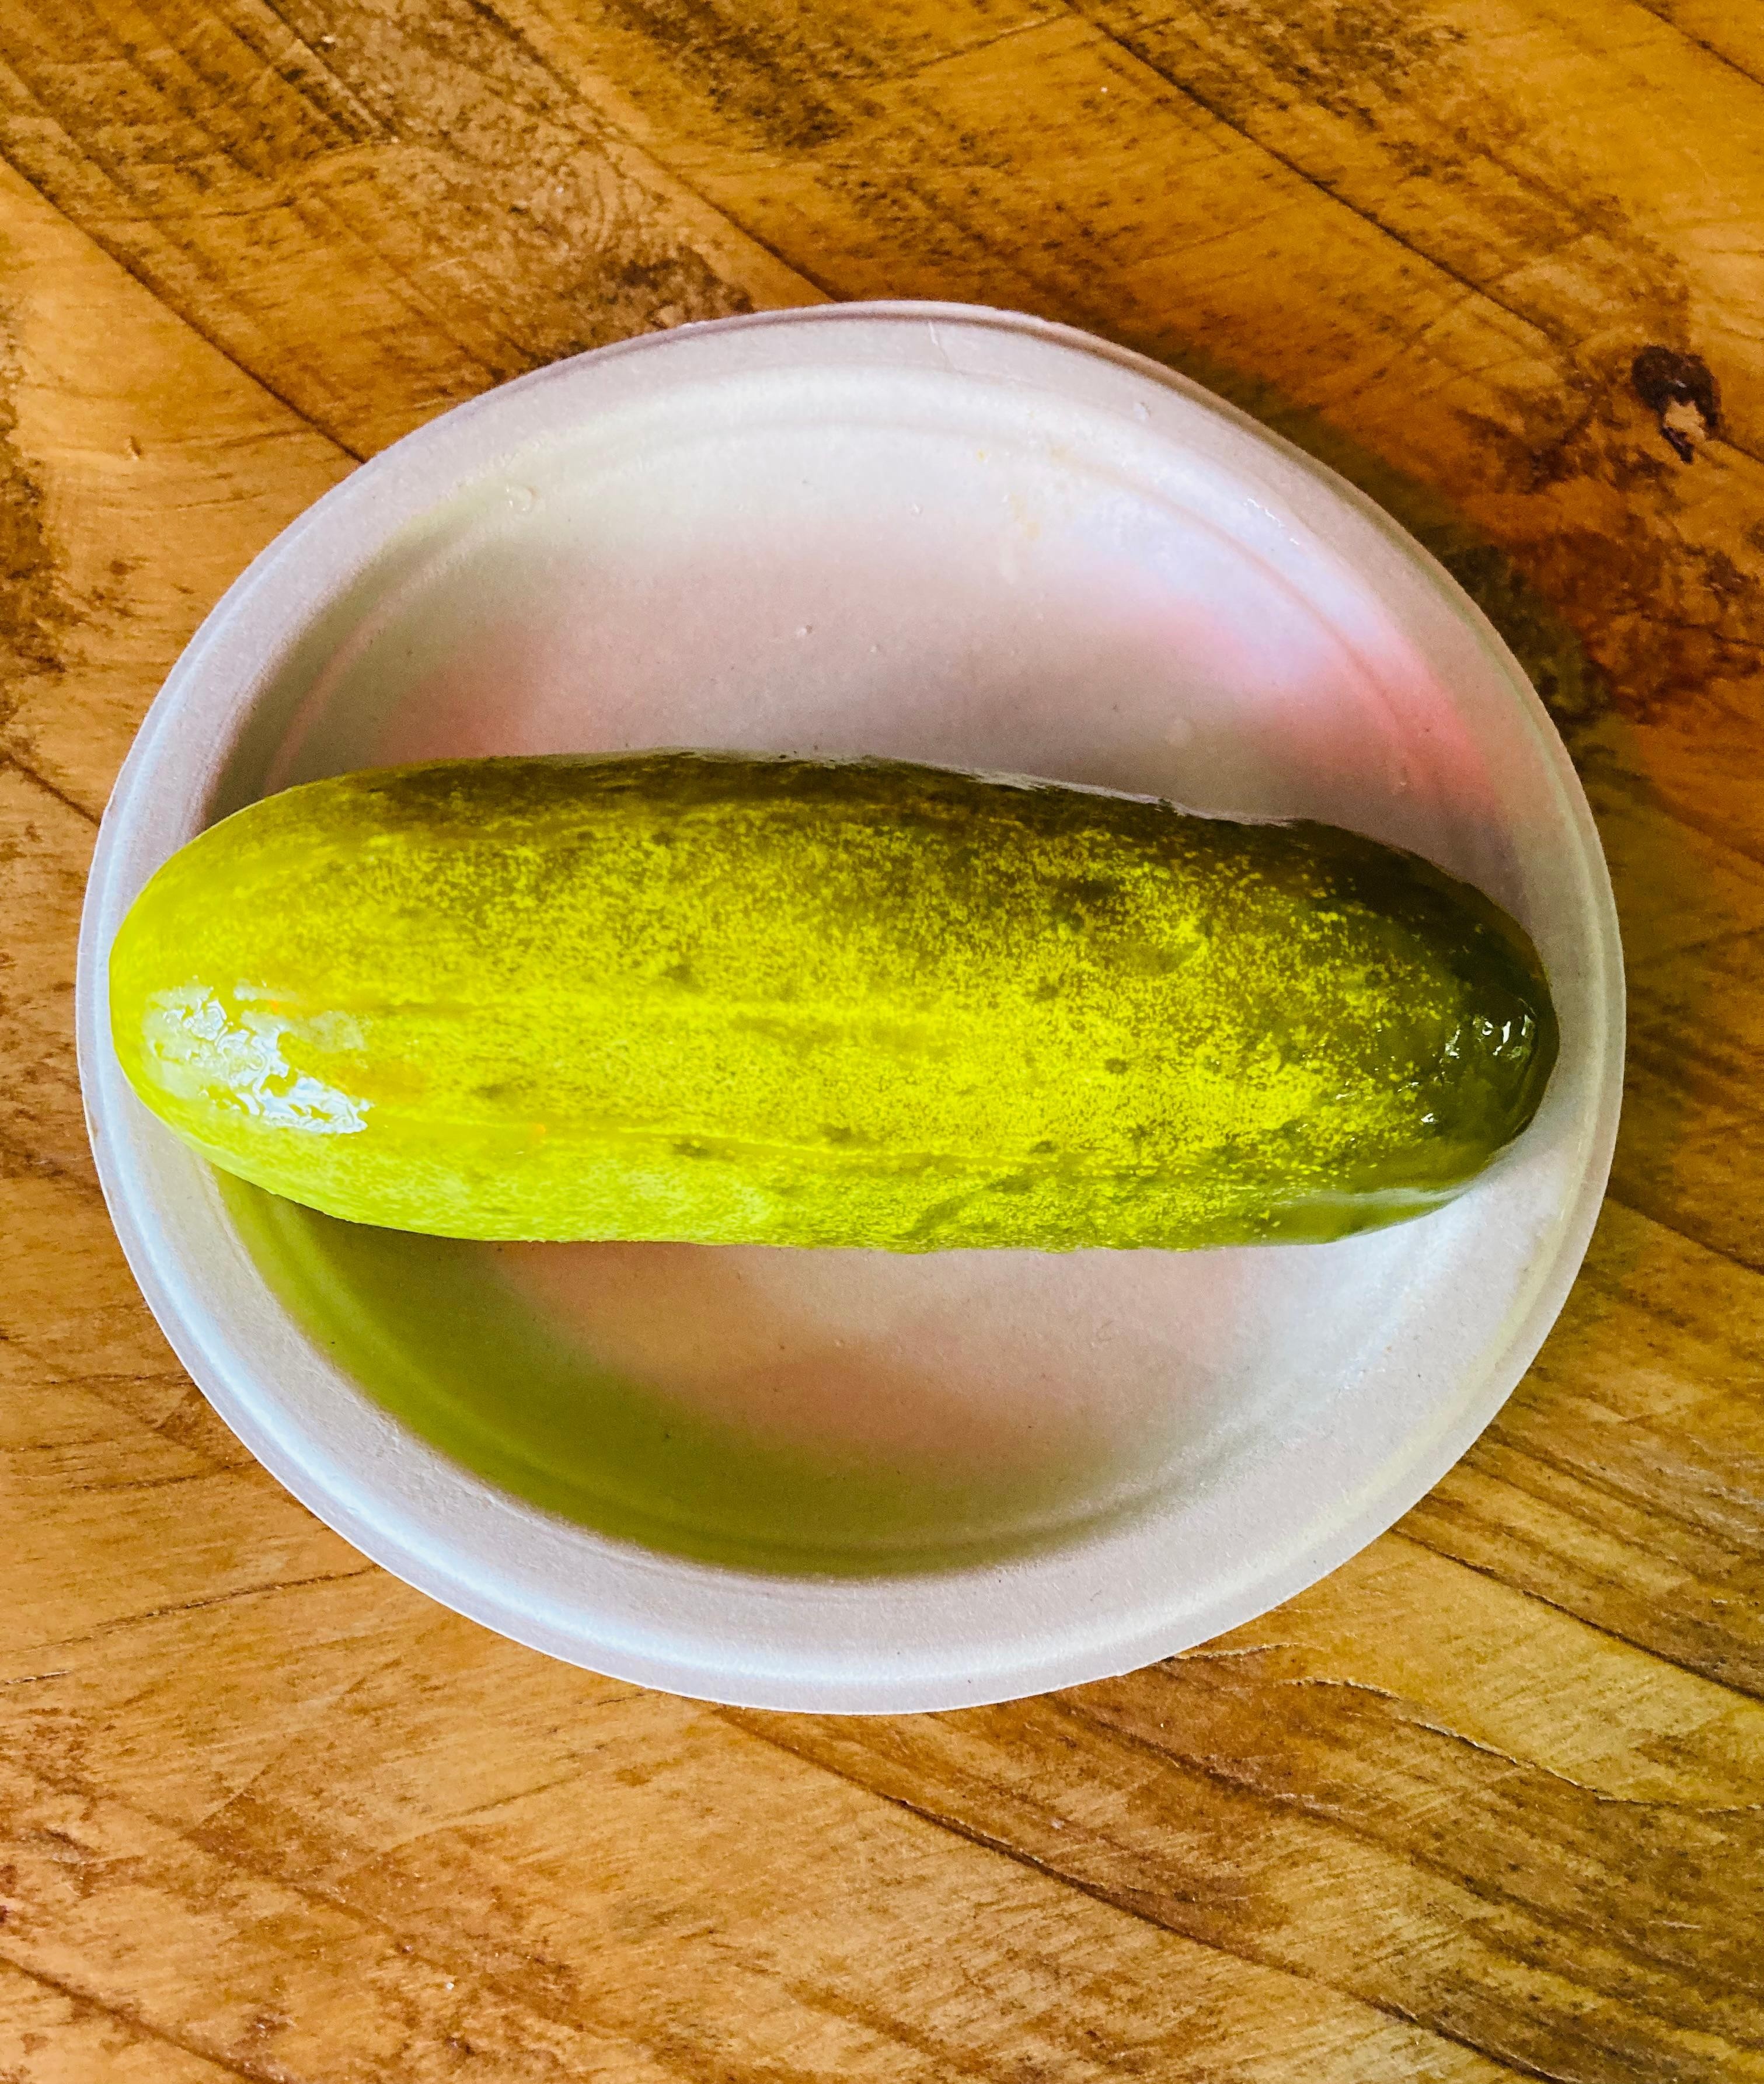 Whole Pickle Speared